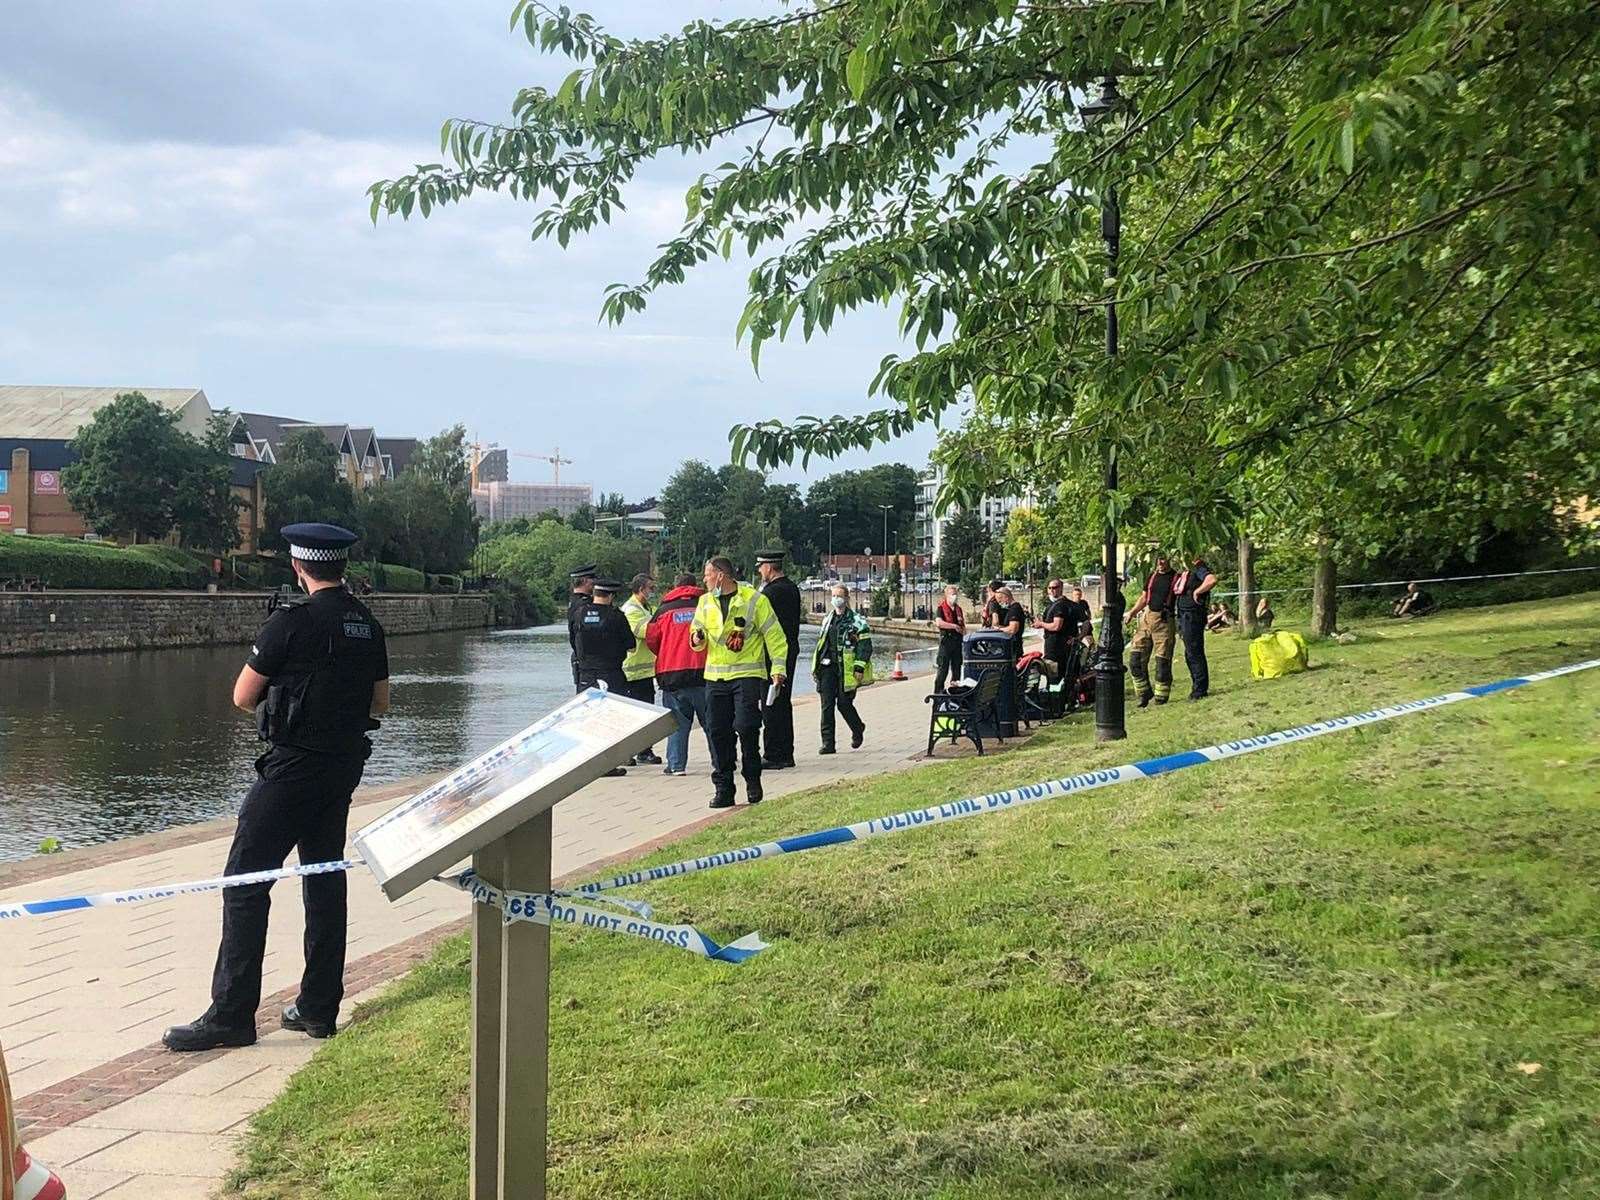 A section of the riverbank has been taped off